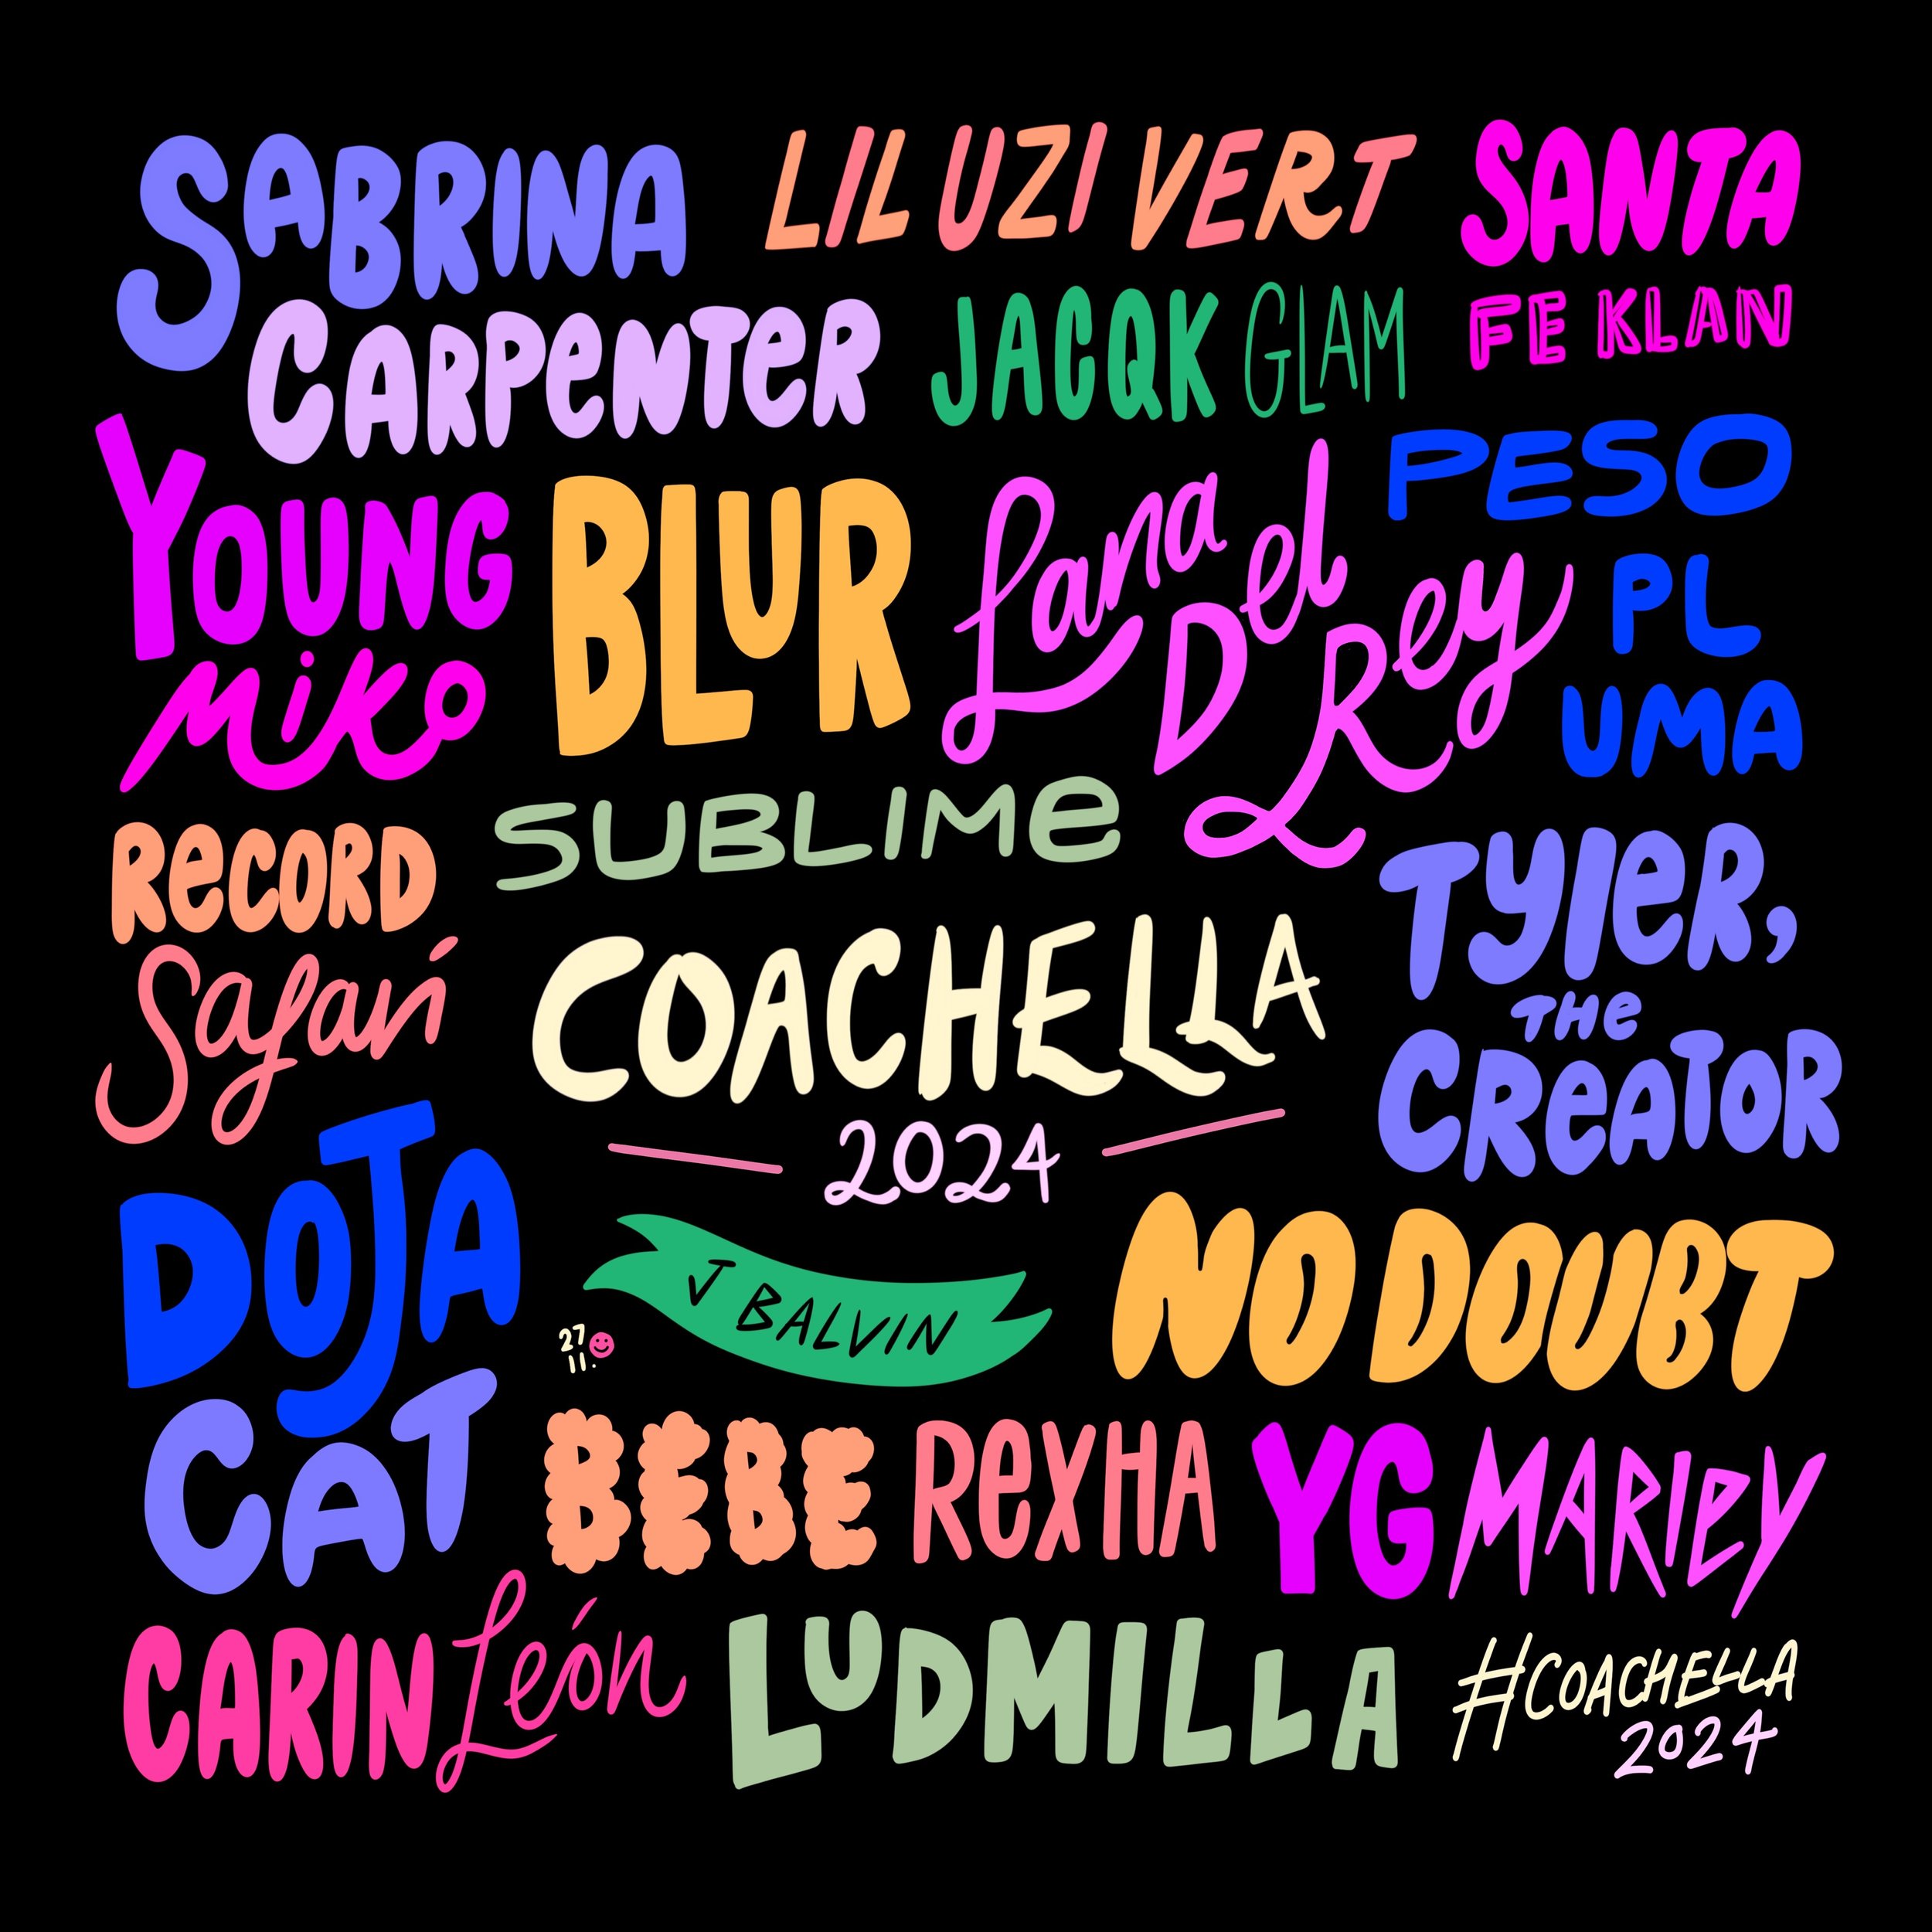 💖 Coachella ~ a girl can dream right?! 🏄&zwj;♀️ Meanwhile I&rsquo;ll just stay in the studio and illustrate the headliners  with the @coachella playlist on repeat ✨

#coachella #coachella2024 #lanadelrey #lanadelreyfans #blur #nodoubt #sabrinacarpe